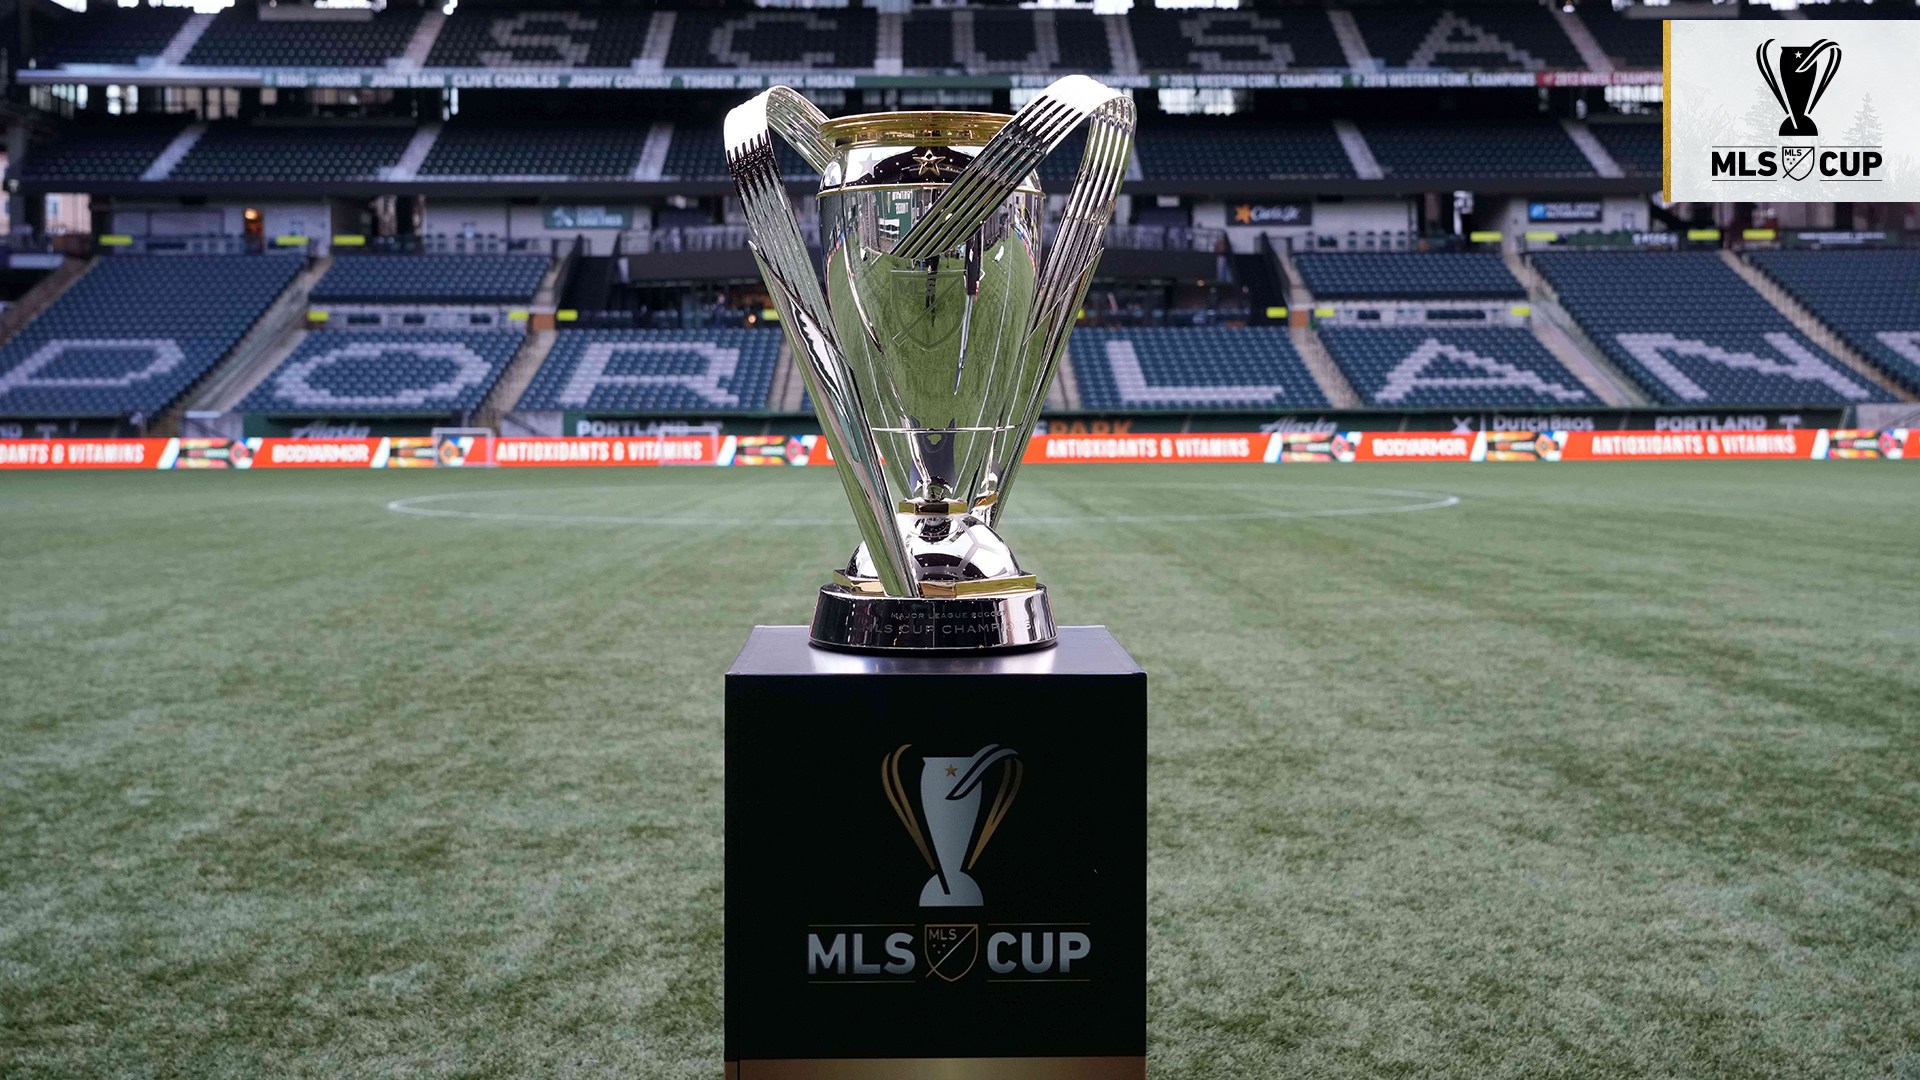 By The Numbers A look at the unique elements of the MLS Cup trophy PTFC